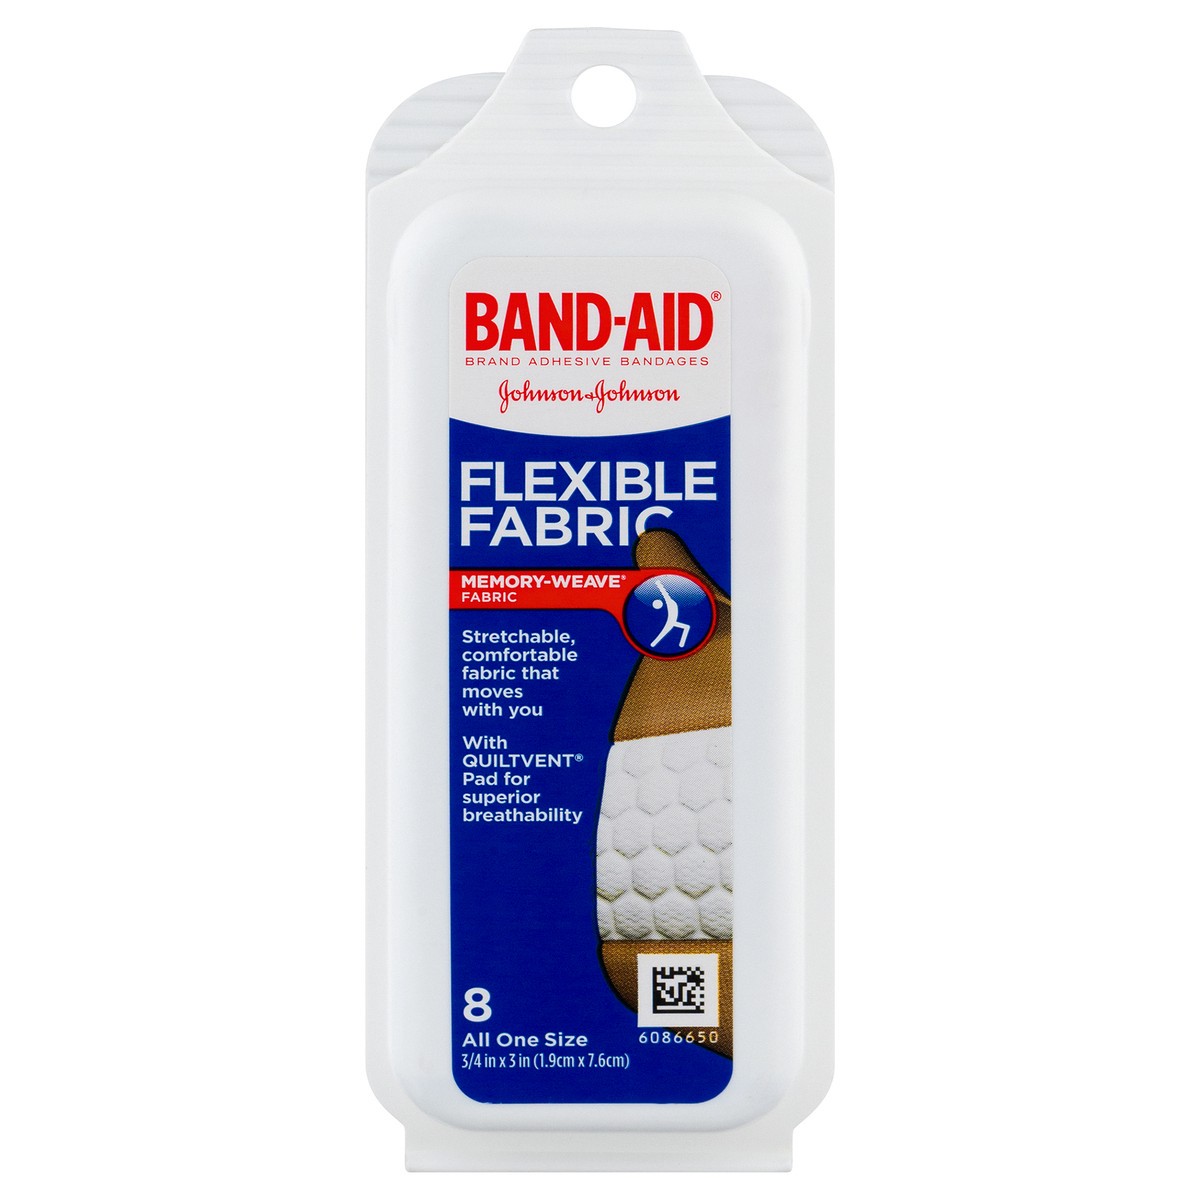 slide 1 of 7, BAND-AID Flexible Fabric Adhesive Bandages for Comfortable Flexible Protection & Wound Care of Minor Cuts & Scrapes, With Quilt-Aid Technology designed to Cushion Painful Wounds, All One Size, 8 ct, 8 ct